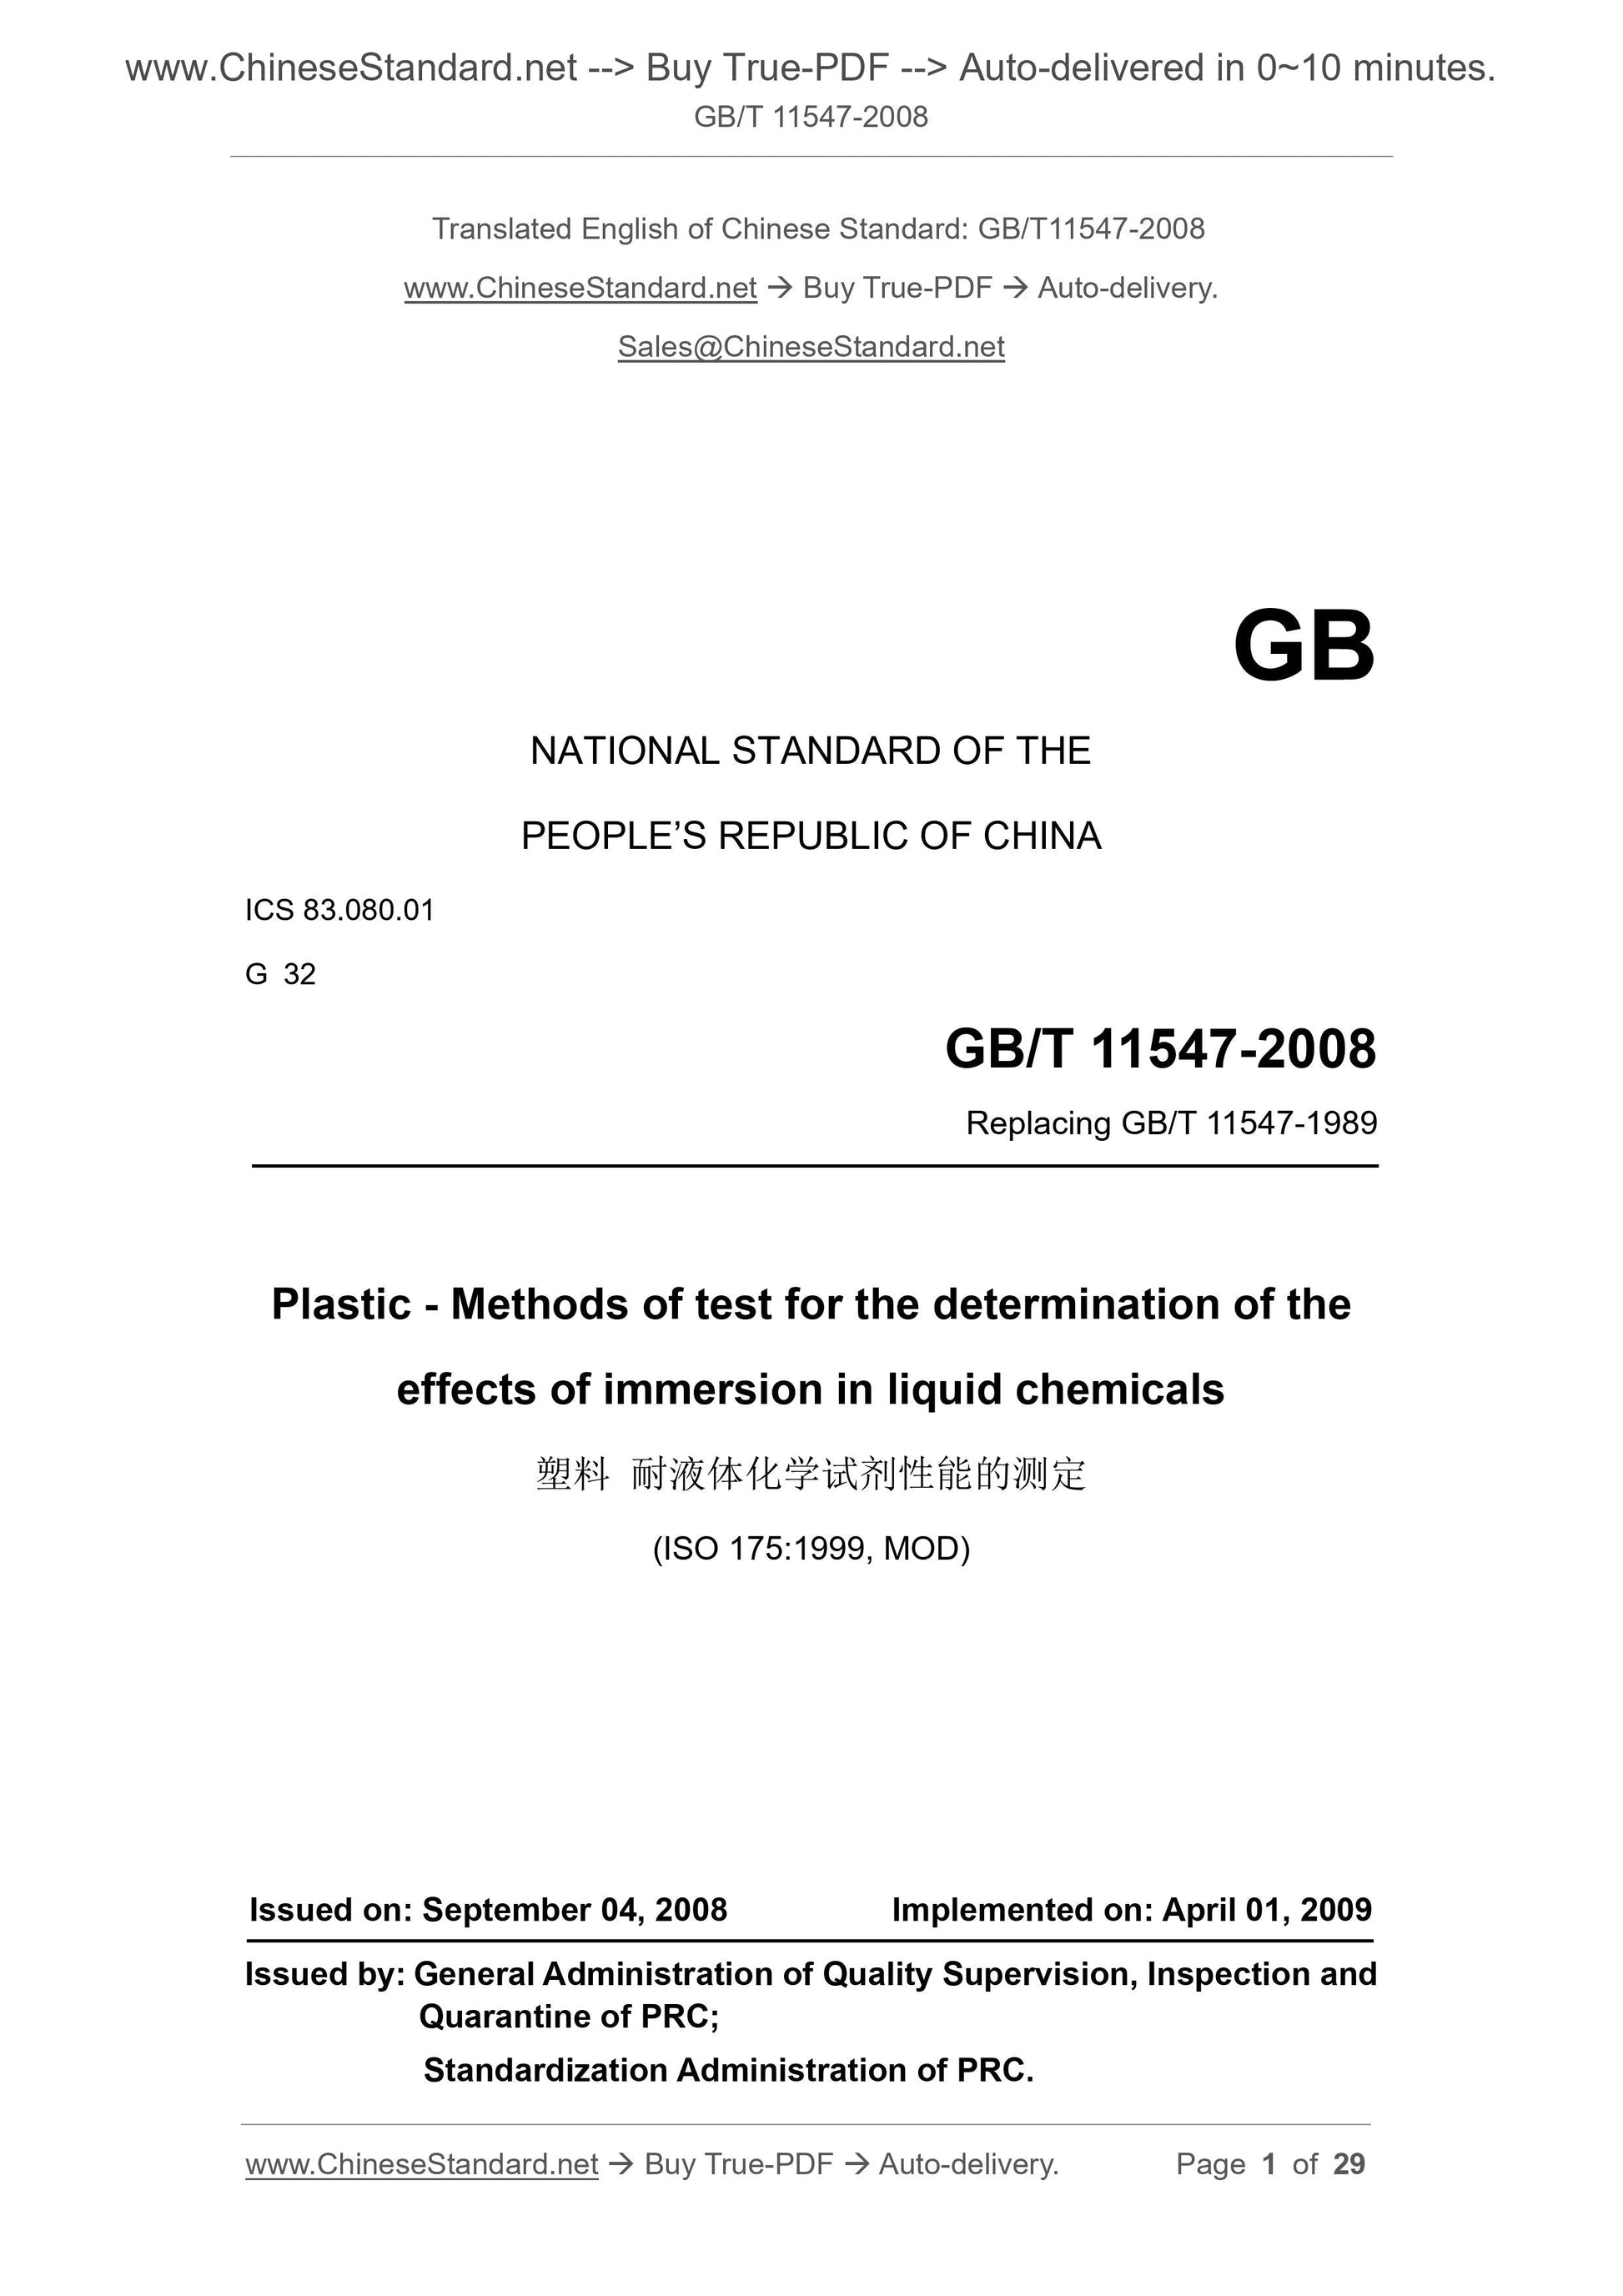 GB/T 11547-2008 Page 1